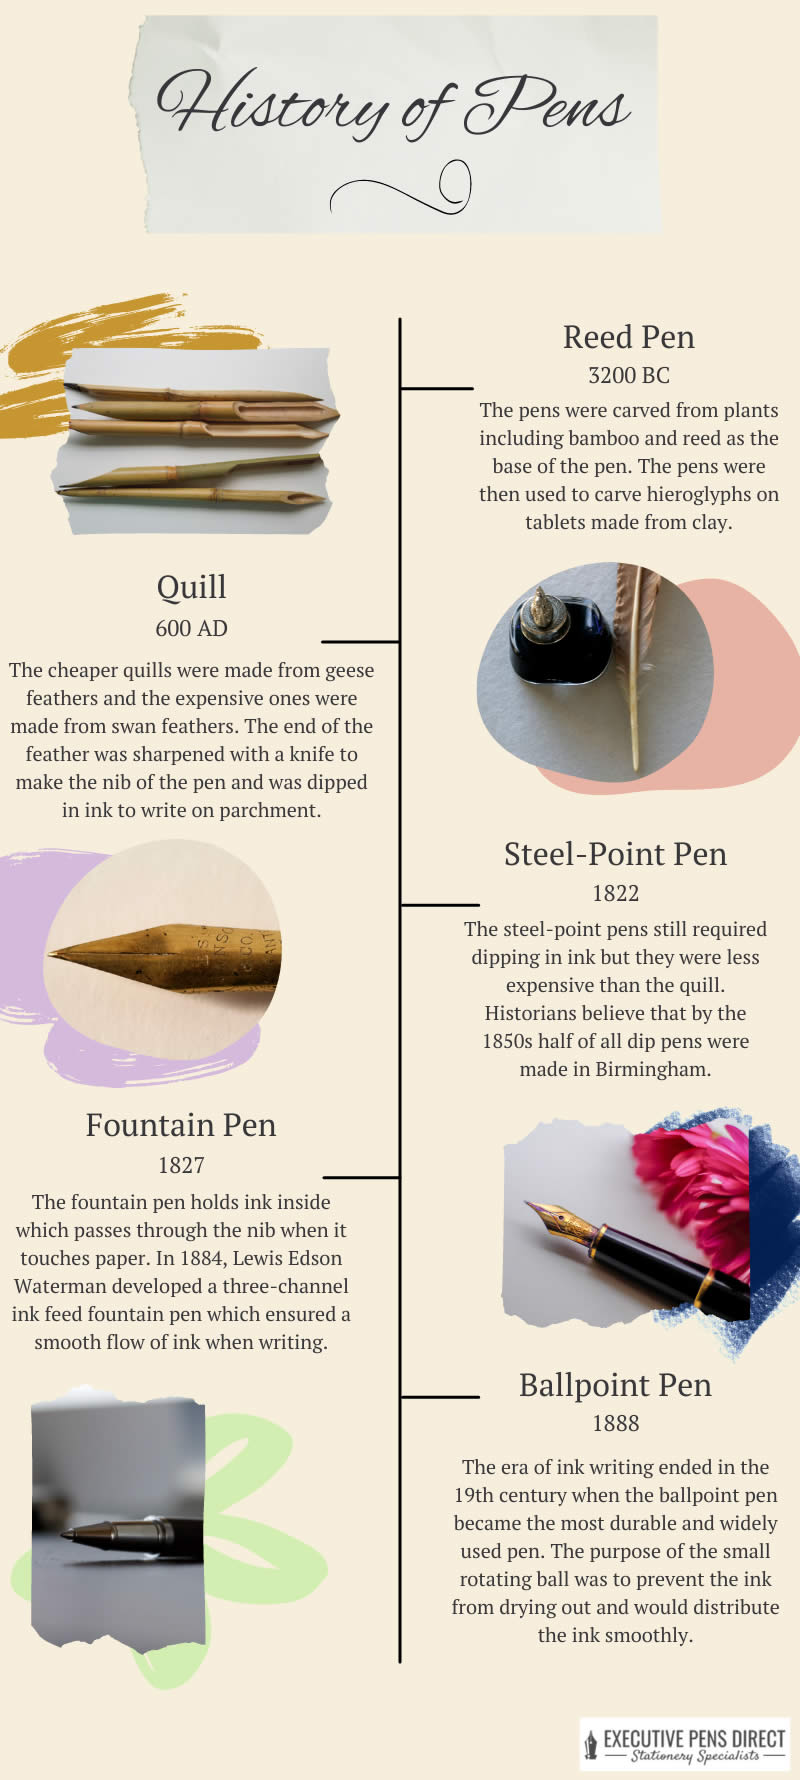 Product Archives - Page 10 of 24 - Mr. Pen Store